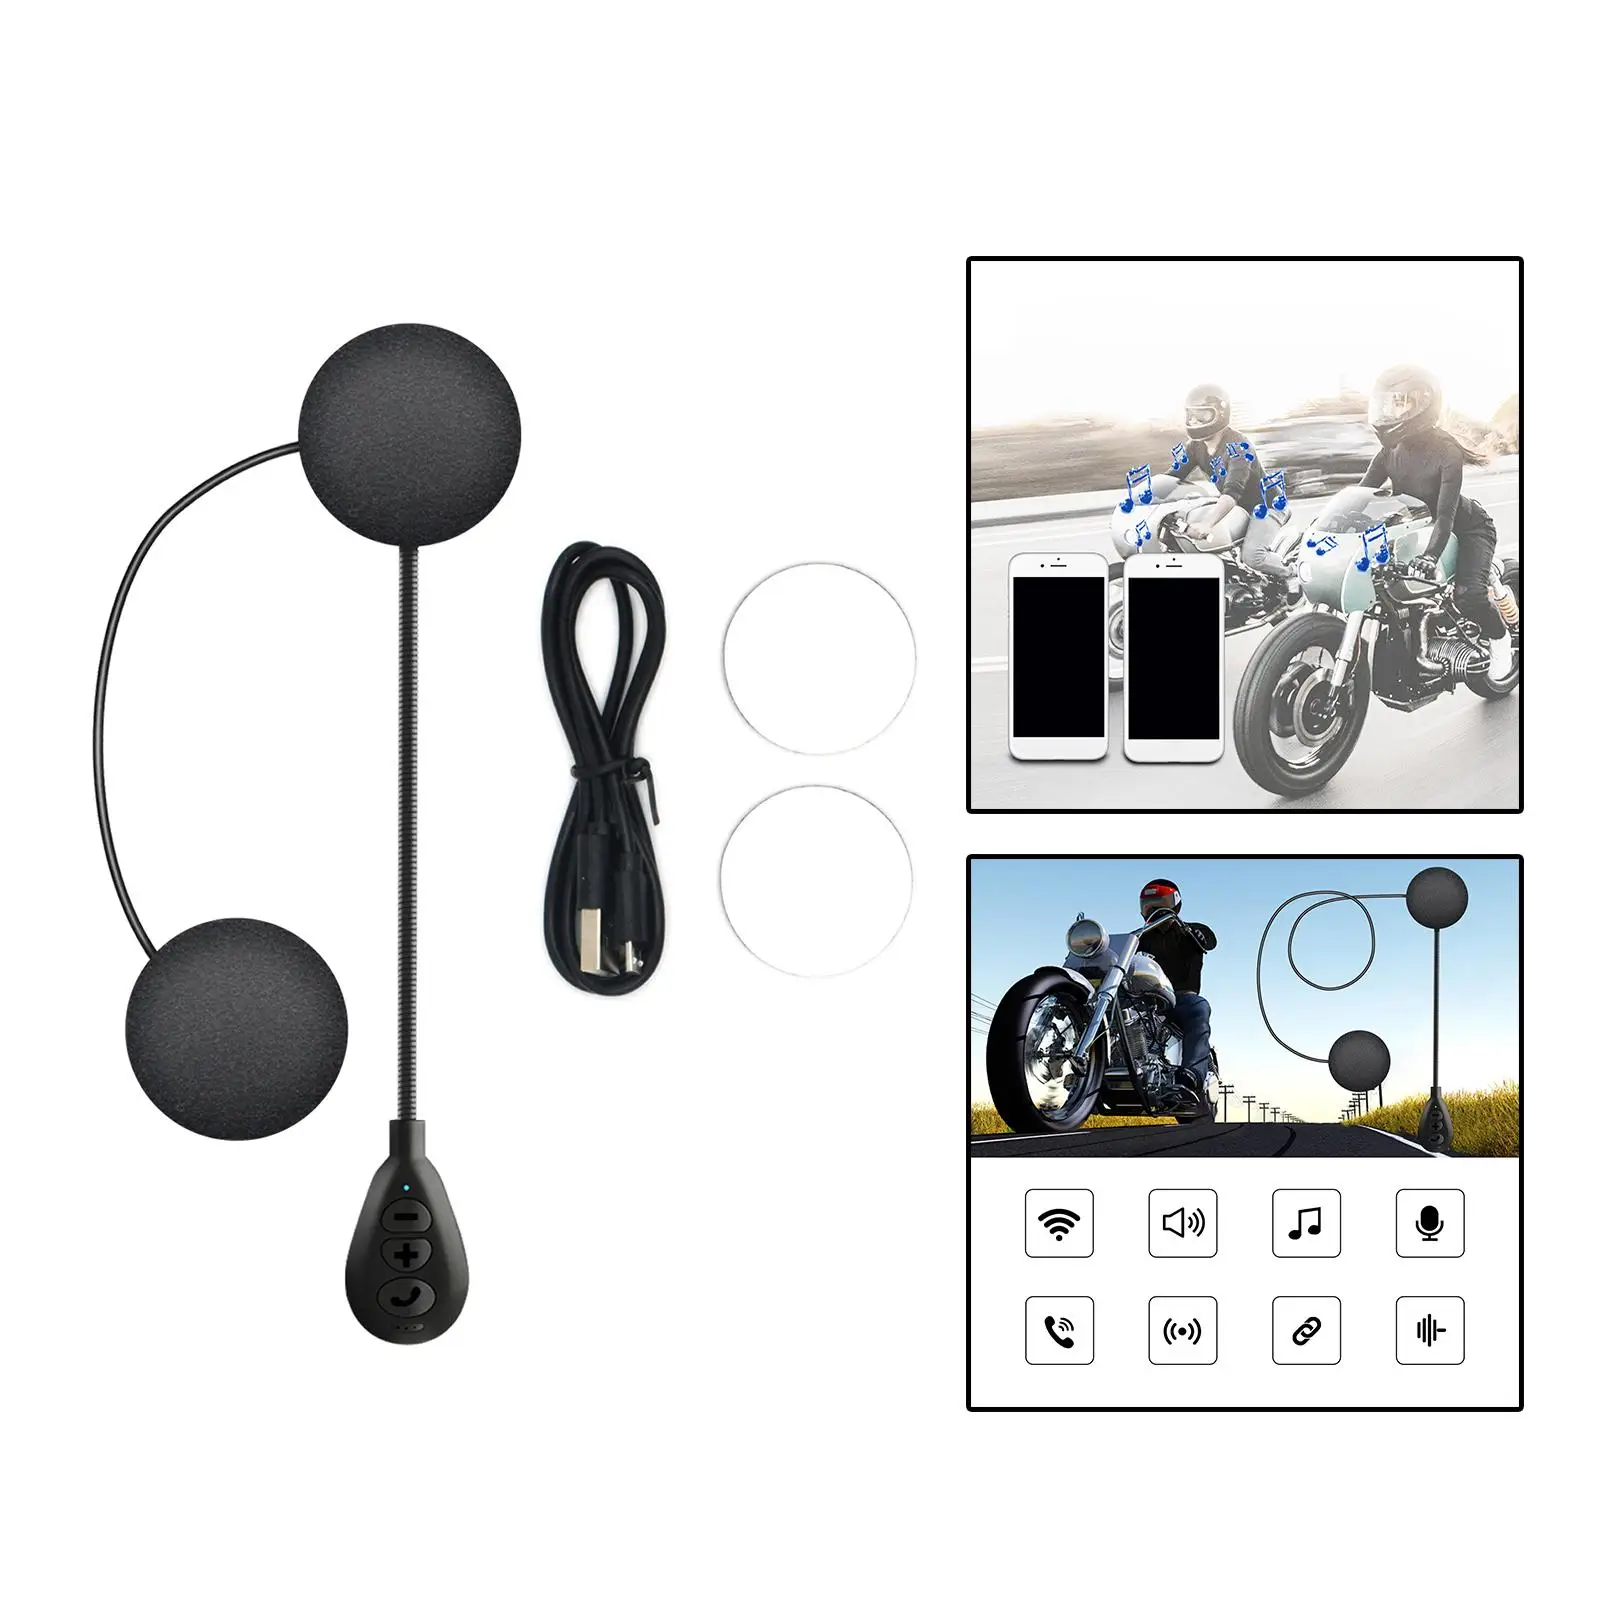 Motorcycle Bluetooth Helmet Headset Speakers Stereo for Outdoor Sports